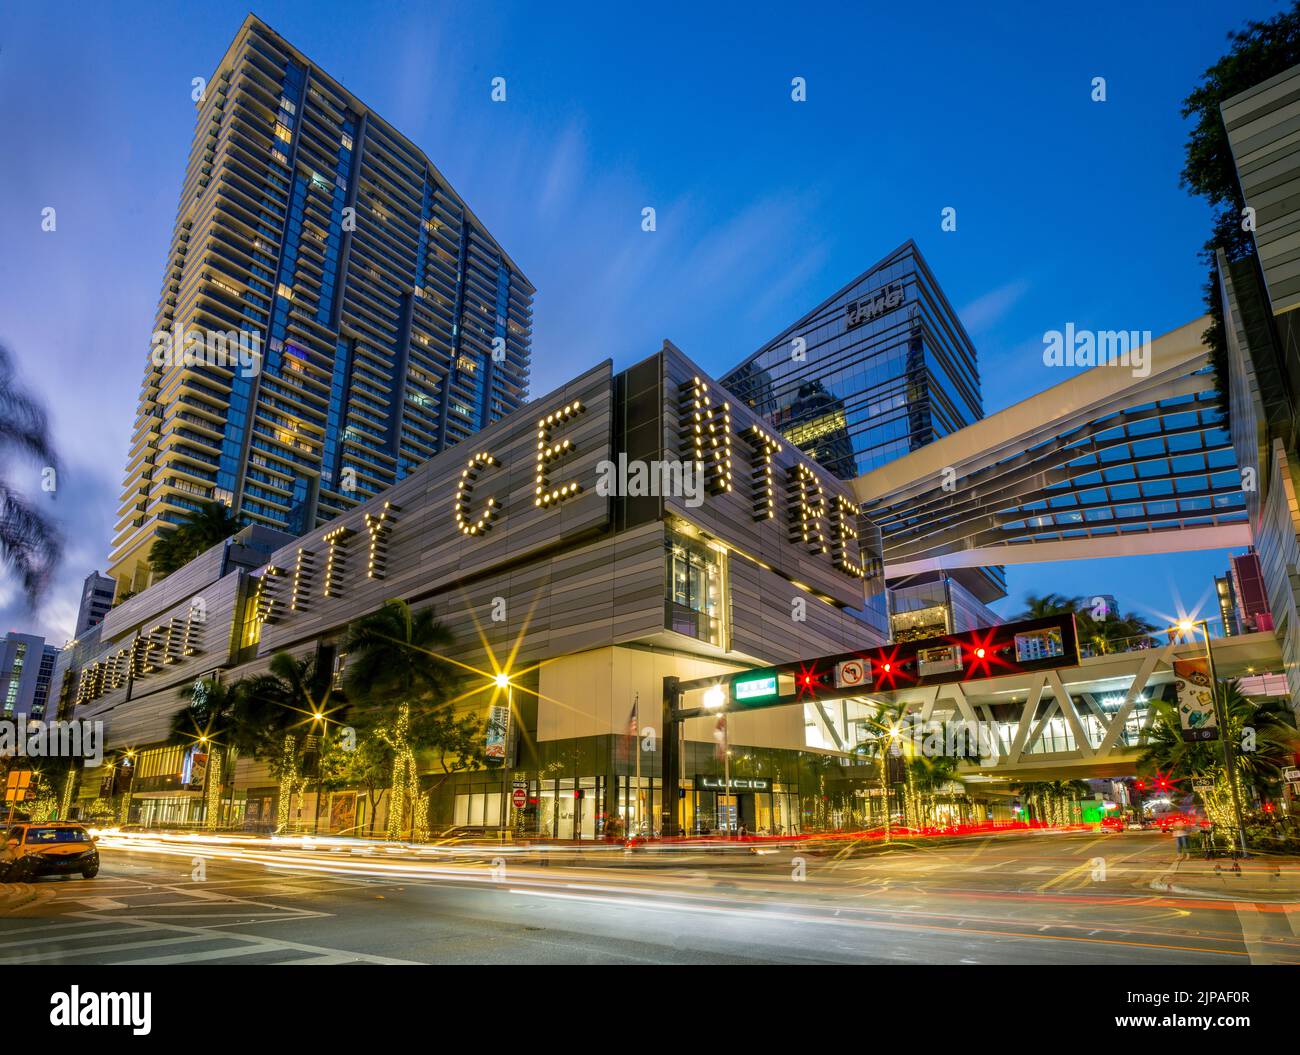 Brickell City Center Modern Shopping Mall and Business Complex in Downtown Miami, Miami, South Florida,USA Stock Photo